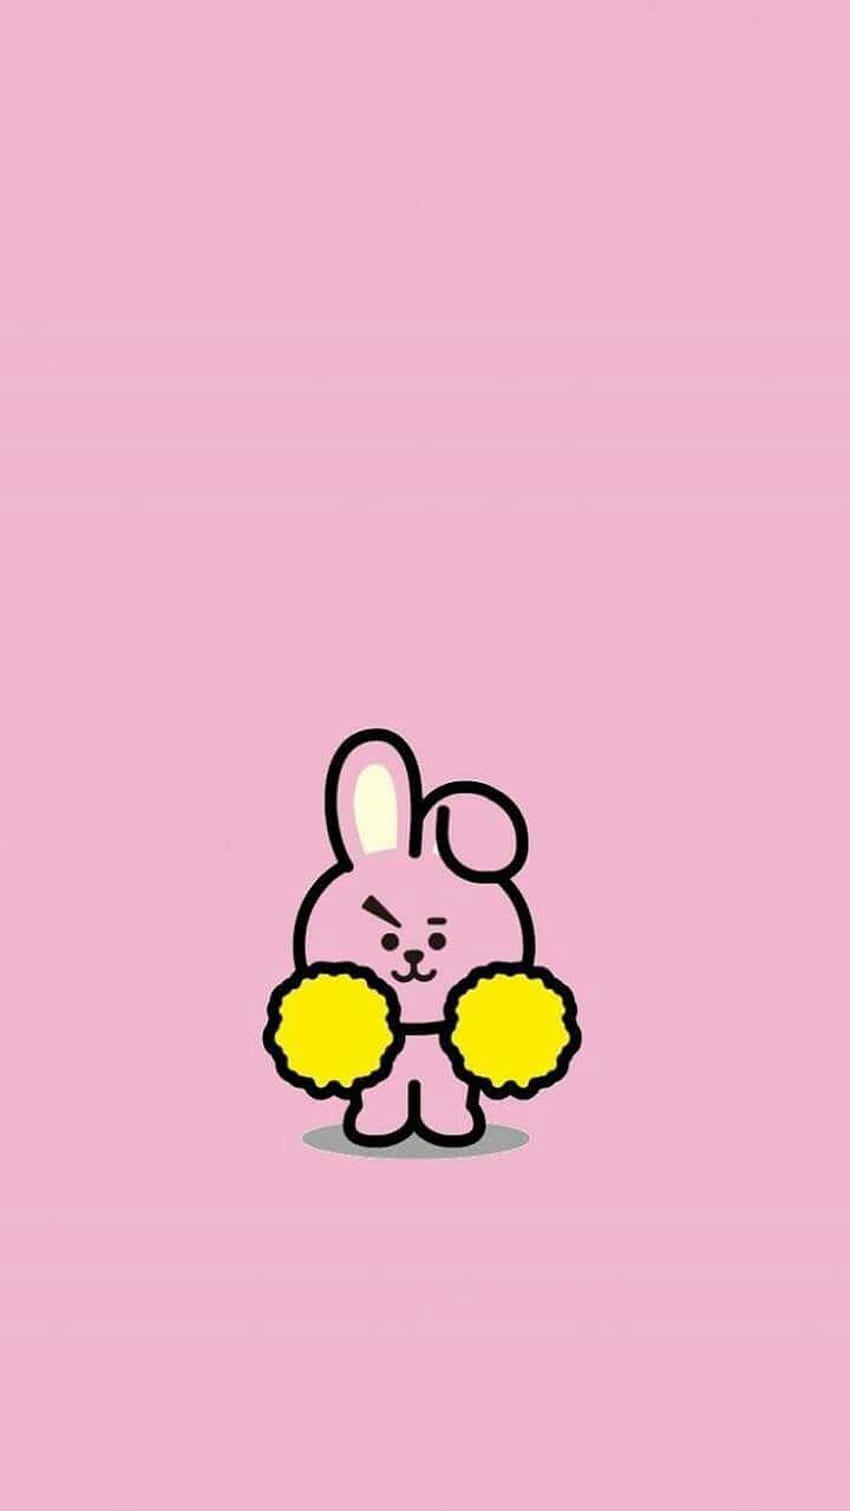 Pink Cooky BT21 for Phone and Backgrounds, android bt21 halloween HD phone wallpaper